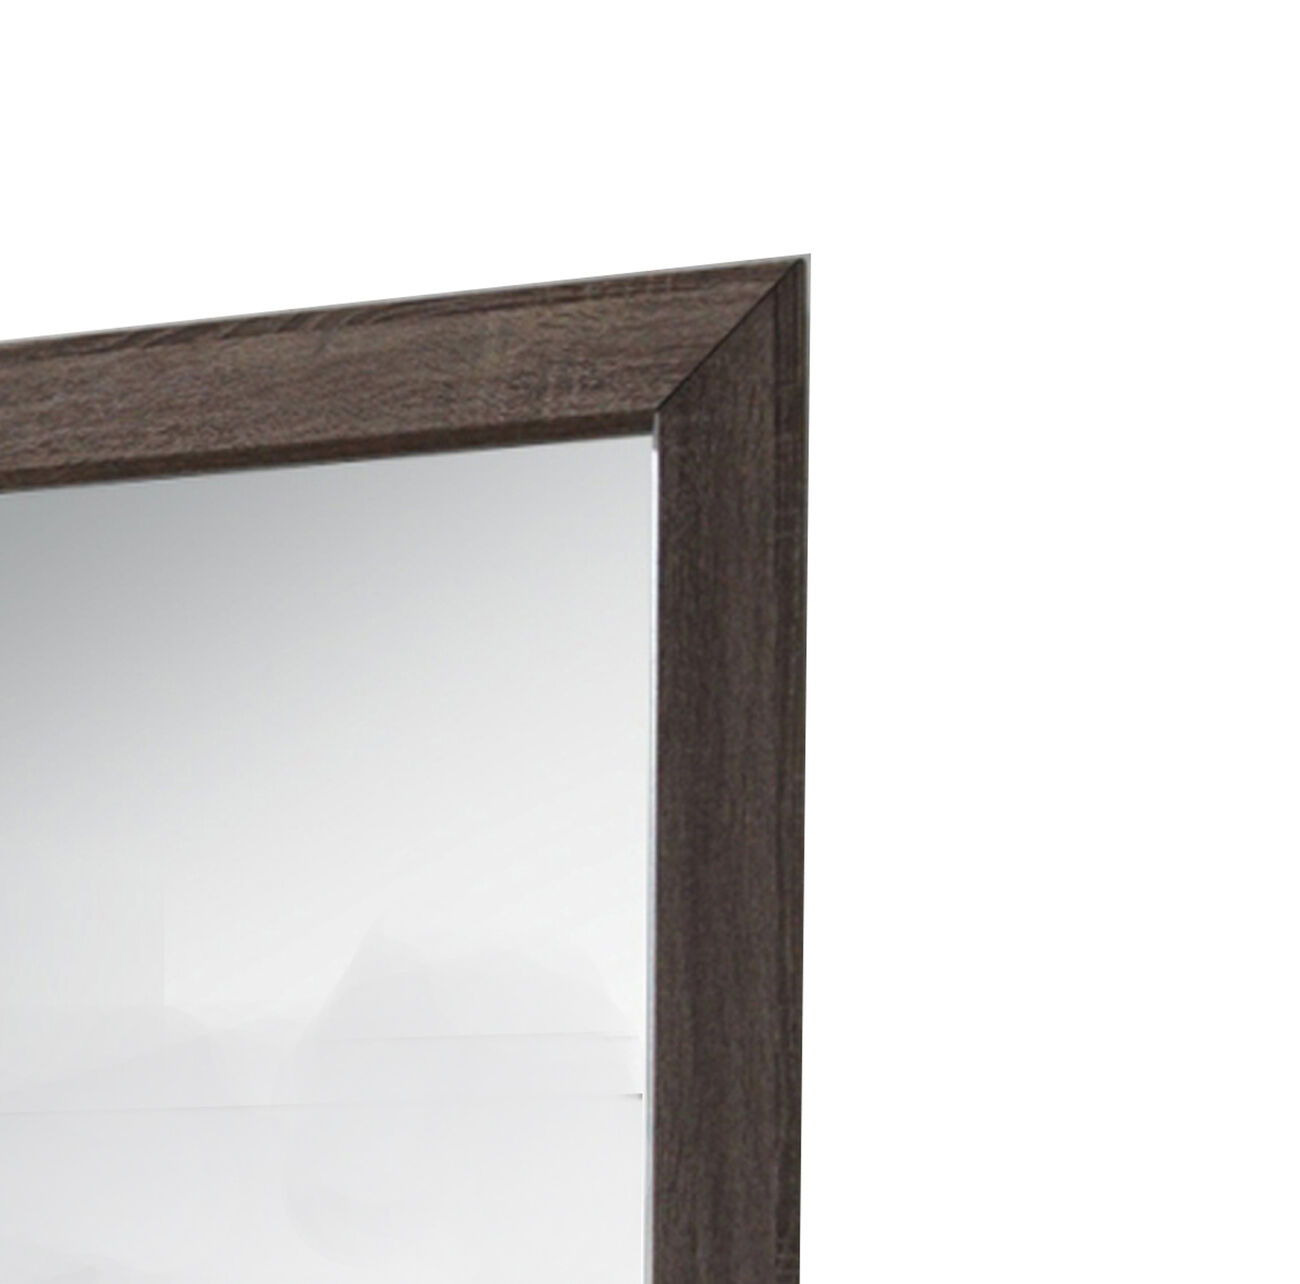 Rectangular and Bulged Wooden Frame Dresser Top Mirror, Brown and Silver